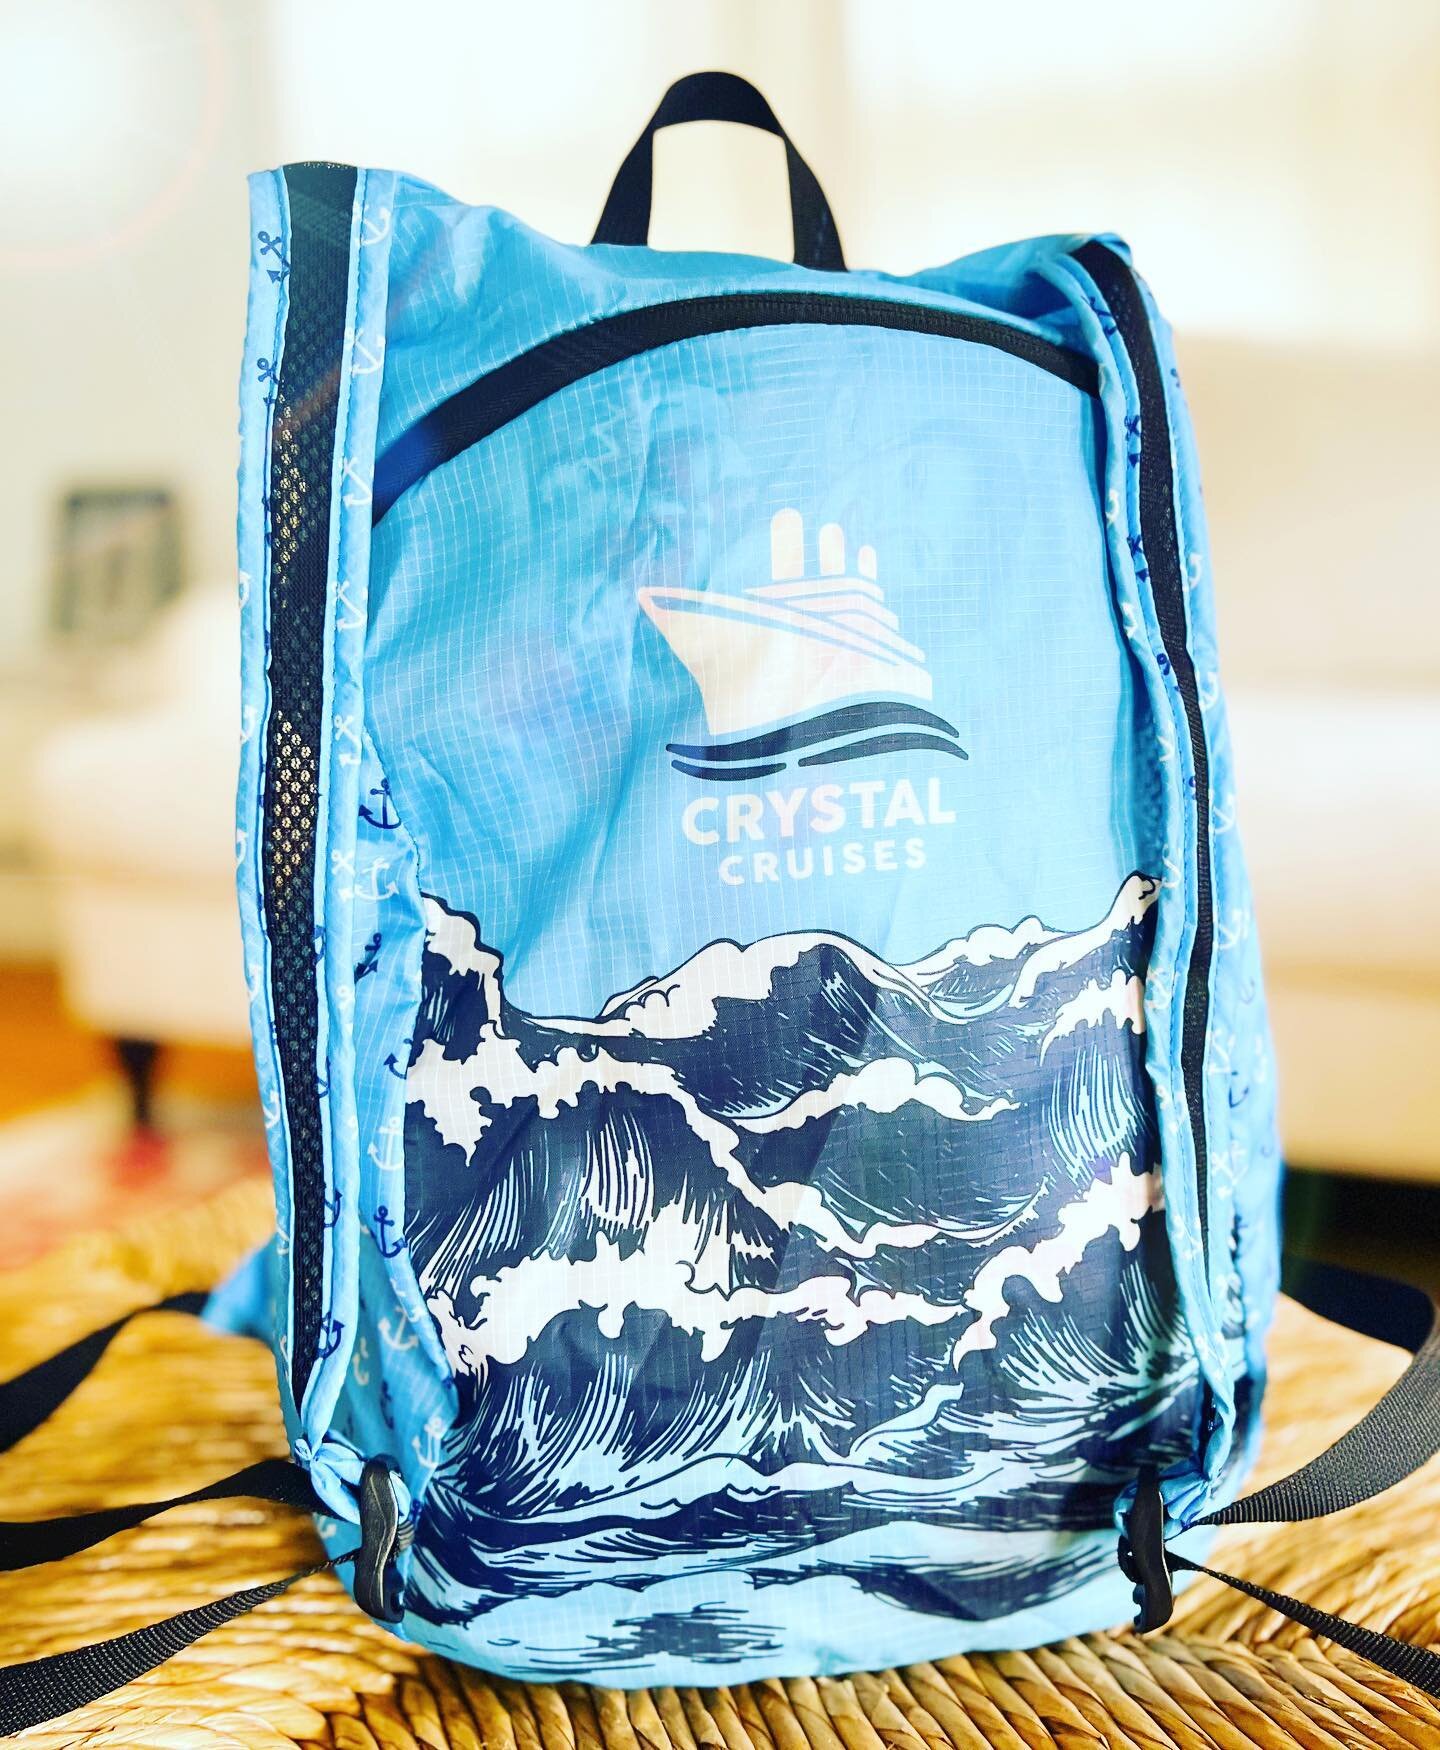 We are READY to #stowaway 🤩🛳️🌊🩵
.
Packable totes and backpacks are HOT right now. Folks are gearing up for events and for their own travels, so what better and smarter way to get YOUR brand #ontheroadagain than gifting these easy-on-the-budget pr